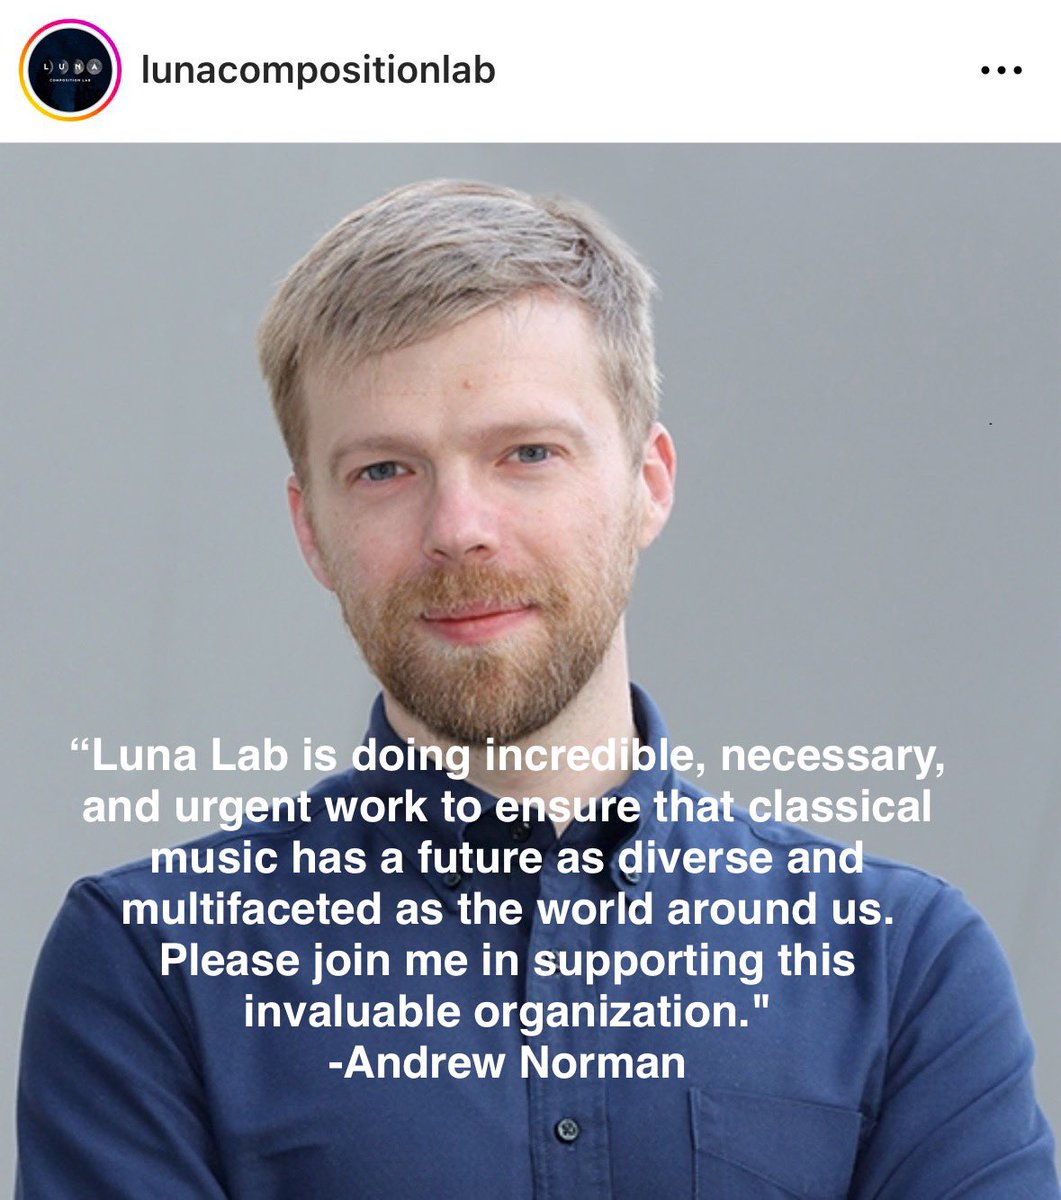 Thank you Andrew Norman for supporting @lunacomplab! All donations to our year-end campaign will help unlock a $10,000 match put forward by parents of our alumni. Make a tax-deductible donation today at lunacompositionlab.org and support the next generation of composers!